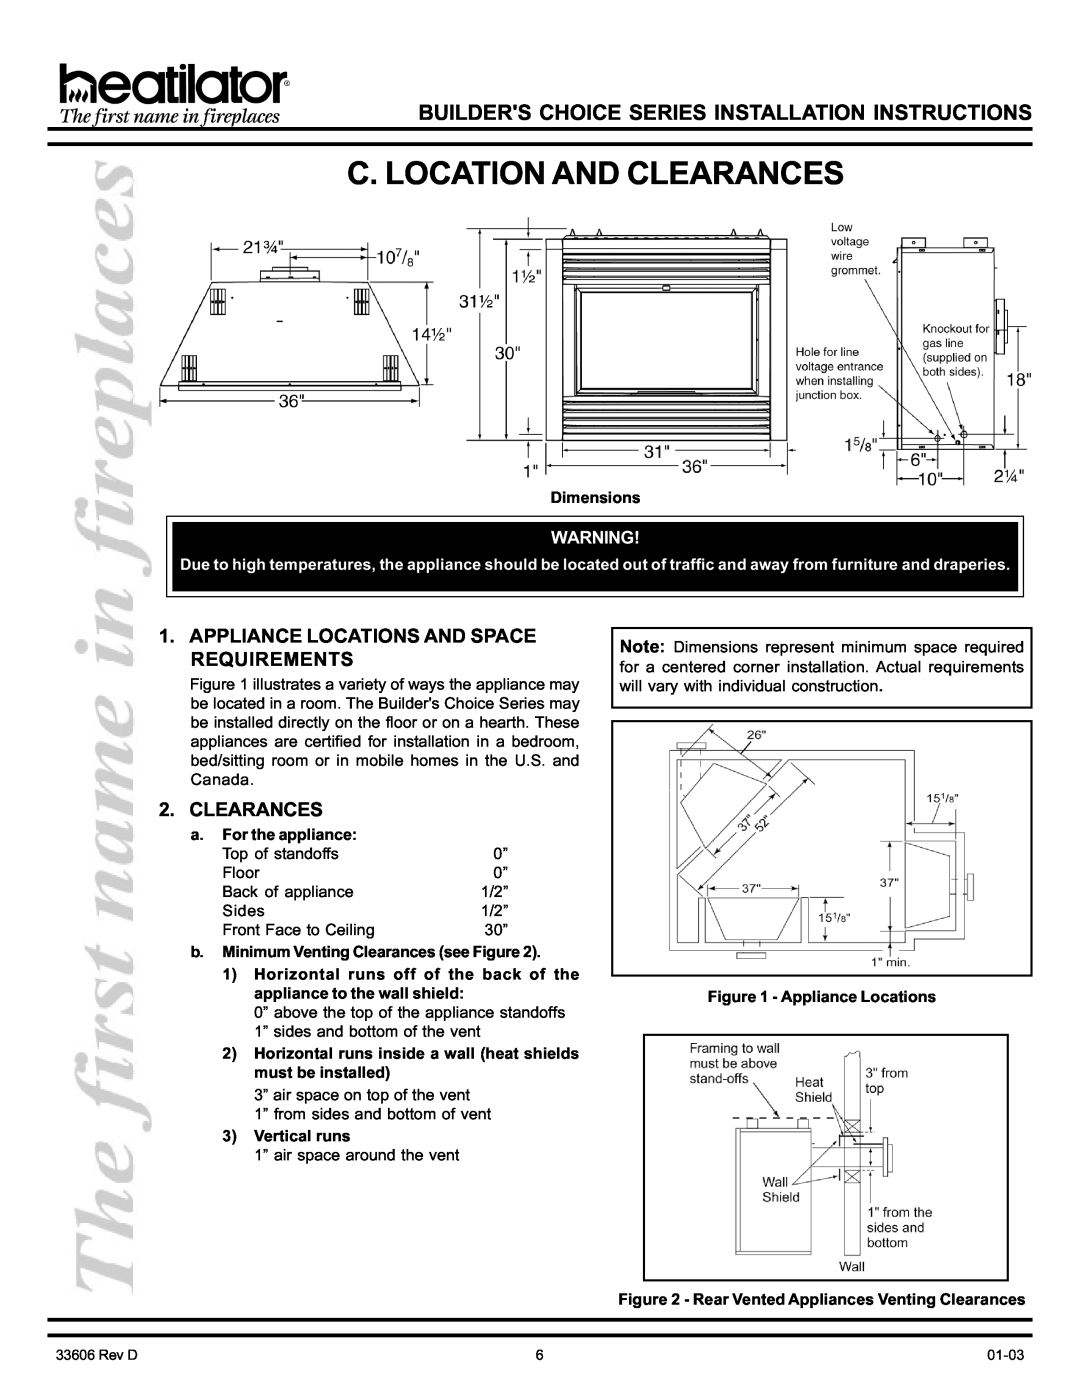 Heatiator BCDV36 C. Location And Clearances, Appliance Locations And Space Requirements, Dimensions, a. For the appliance 